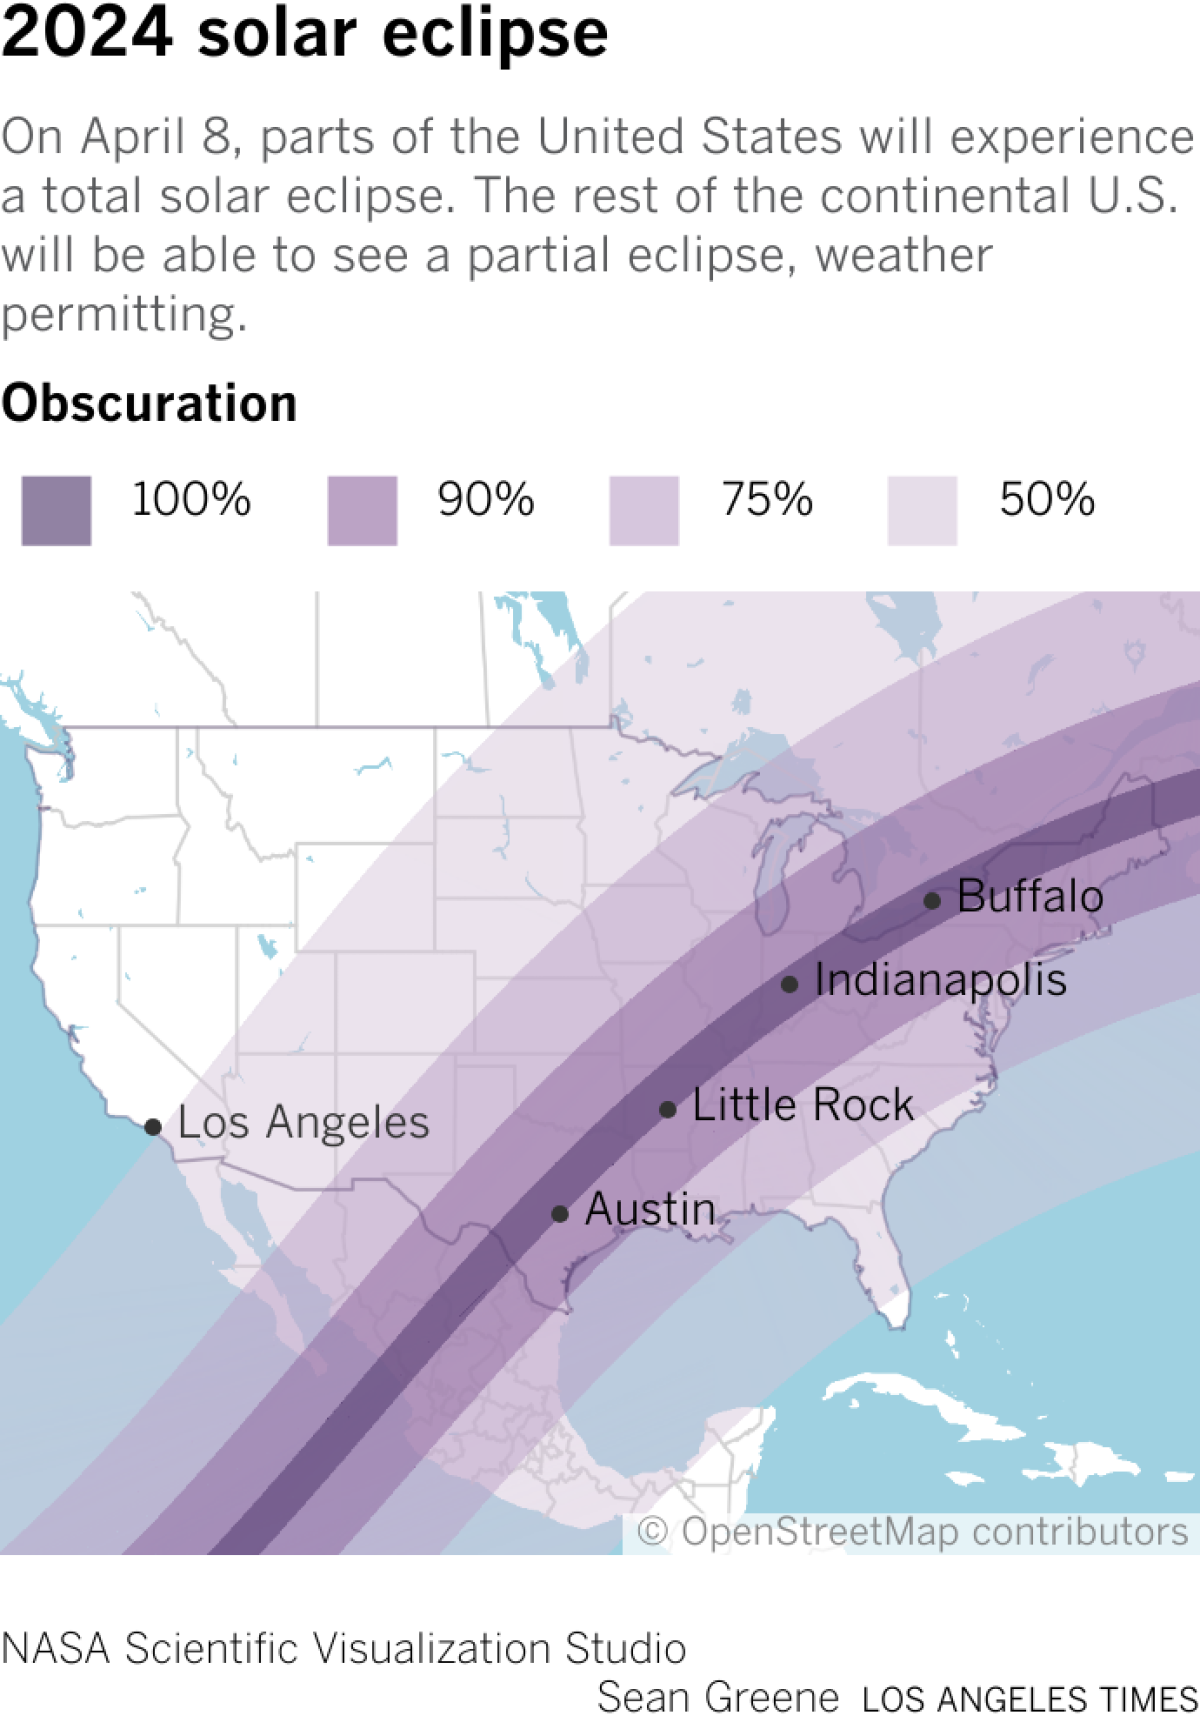 Map shows the path of totality arcing through parts of Texas, Arkansas, Illinois, Indiana, Ohio and New England.